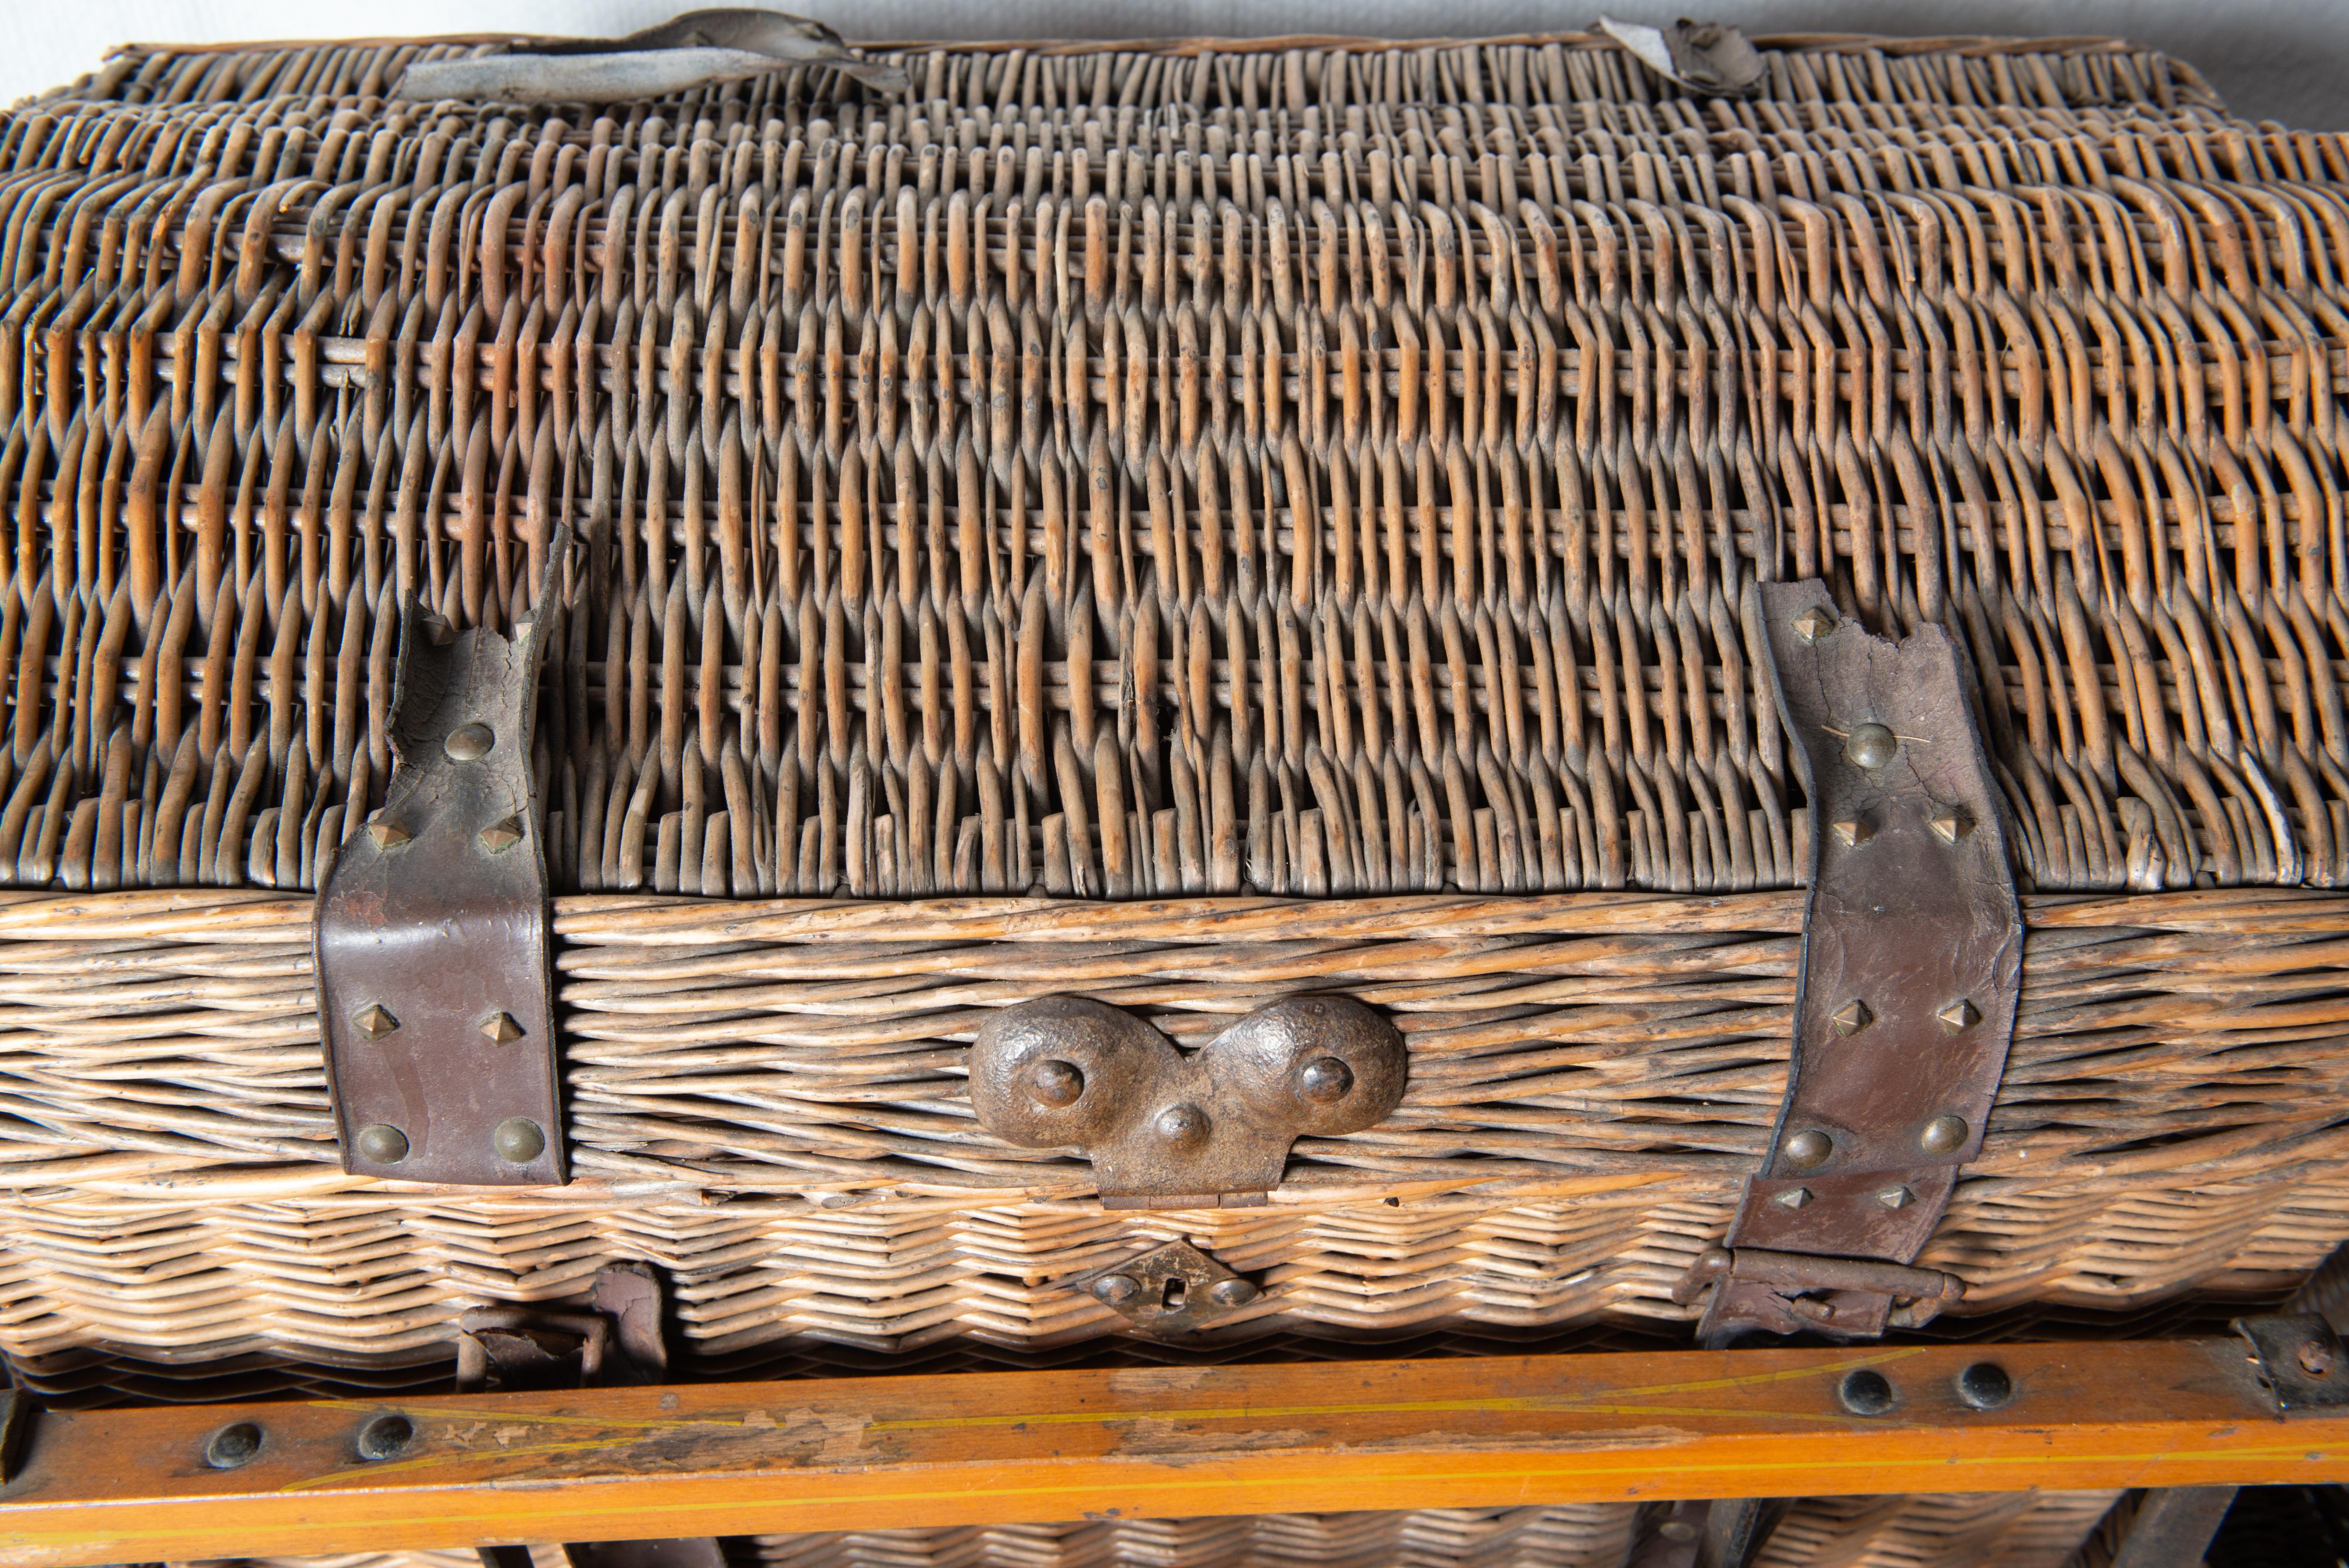 Rolling Wicker Picnic Basket Cart In Fair Condition For Sale In Stamford, CT